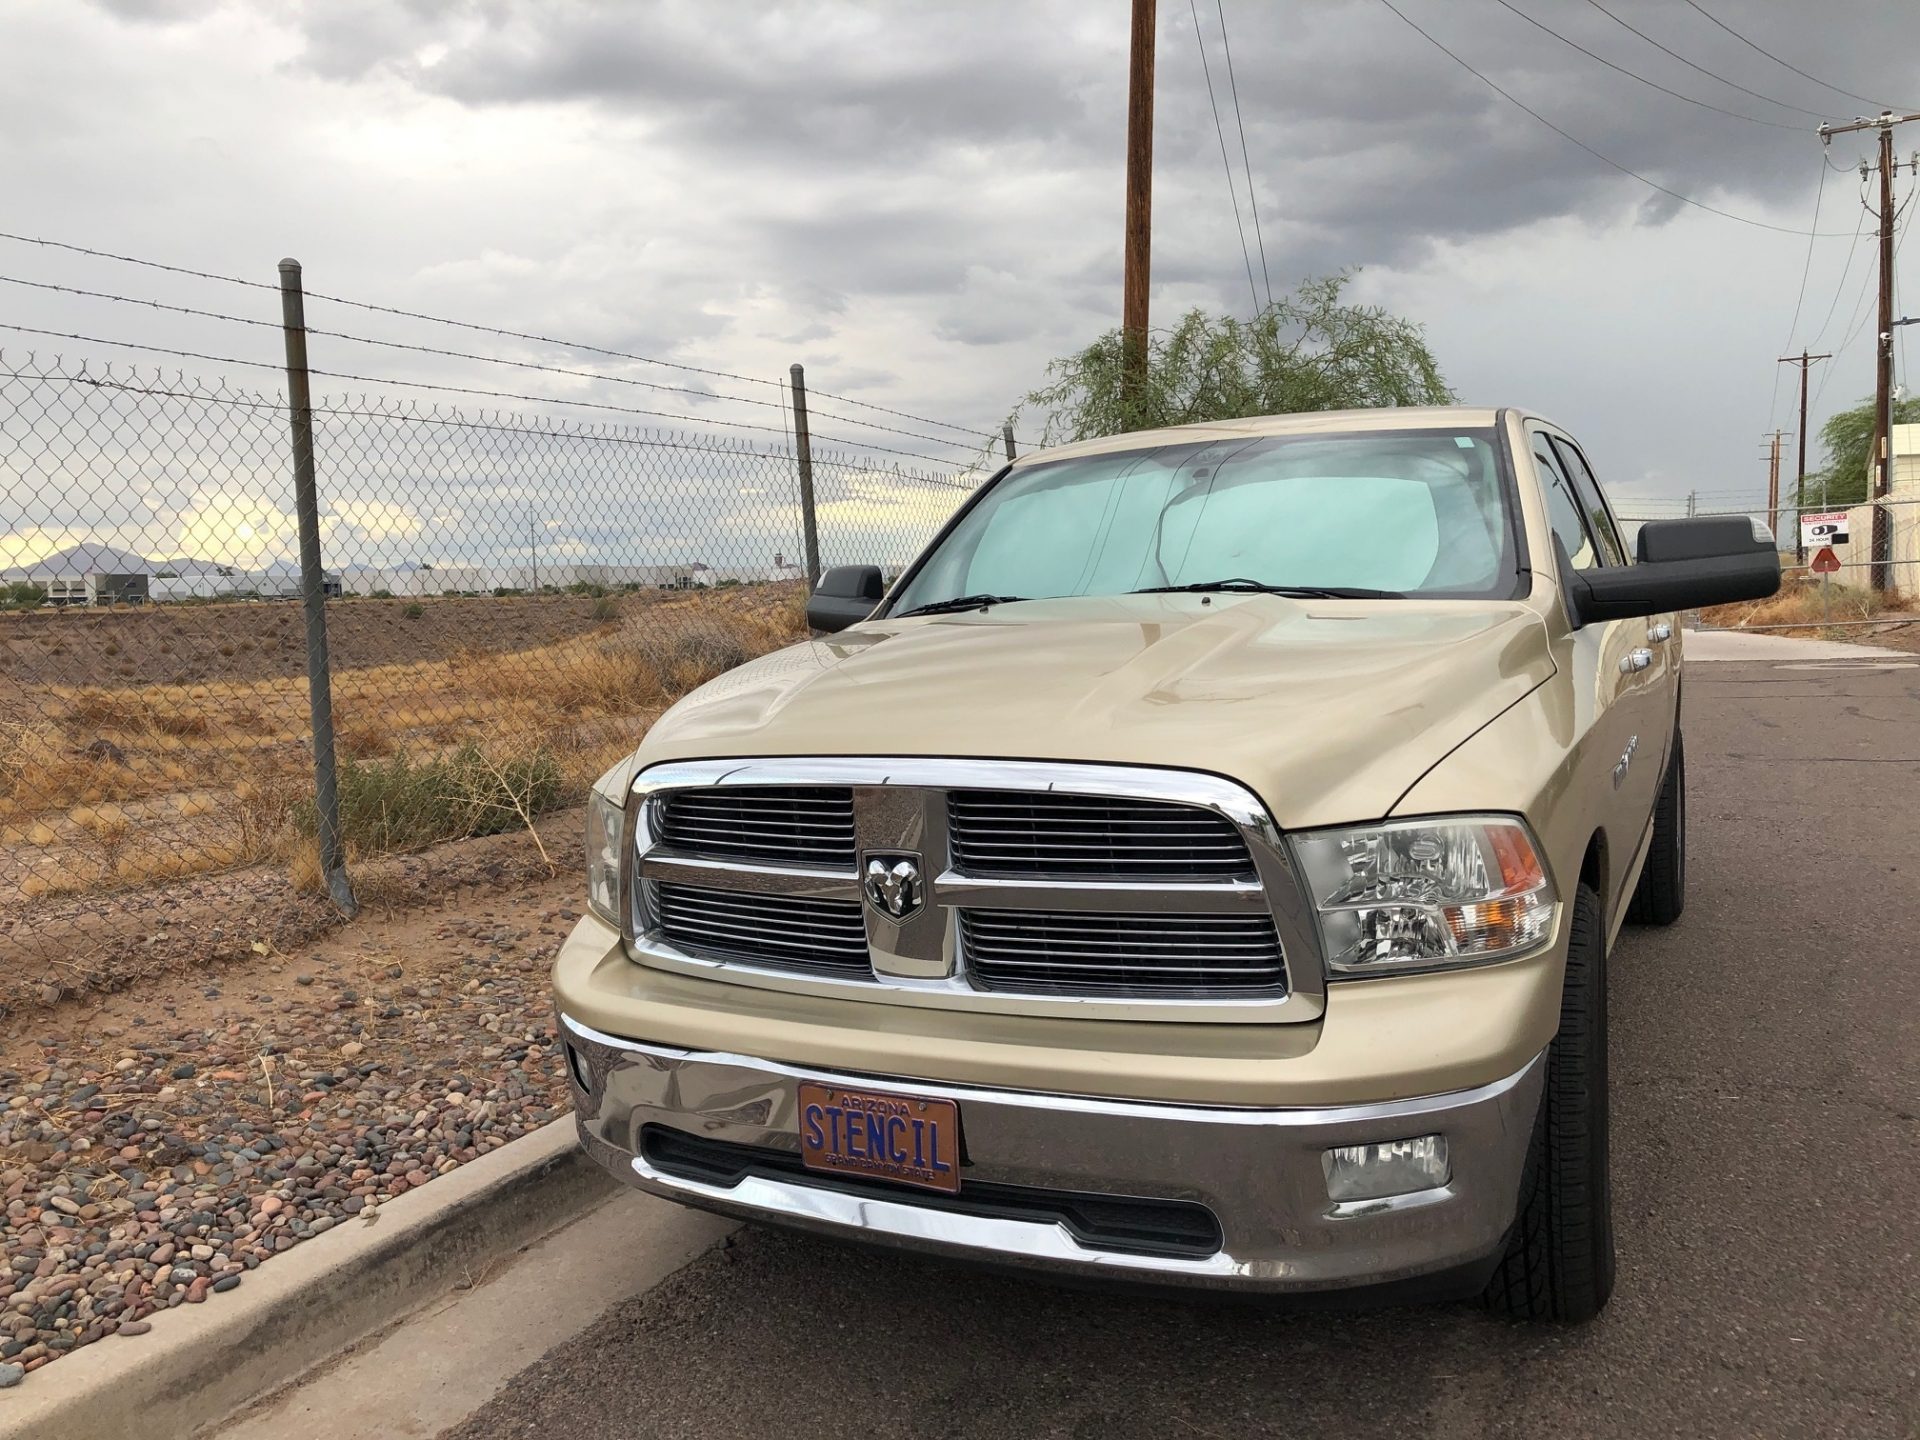 The vehicle of former priest Steven Stencil, left, is parked outside a bus company in Phoenix, Ariz., on Thursday, Sept. 26, 2019. In 2001, Stencil was suspended from ministry after a trip to Mexico that violated a Diocese of Tucson policy forbidding clerics from being with minors overnight. Since 2003, his name has appeared on the diocese's list of clerics credibly accused of sexually abusing children, and his request to leave the priesthood was granted in 2011. In a 2019 Facebook post, the former priest said that he was working as a driver for this private bus company that specializes in educational tours for school groups and scout troops.